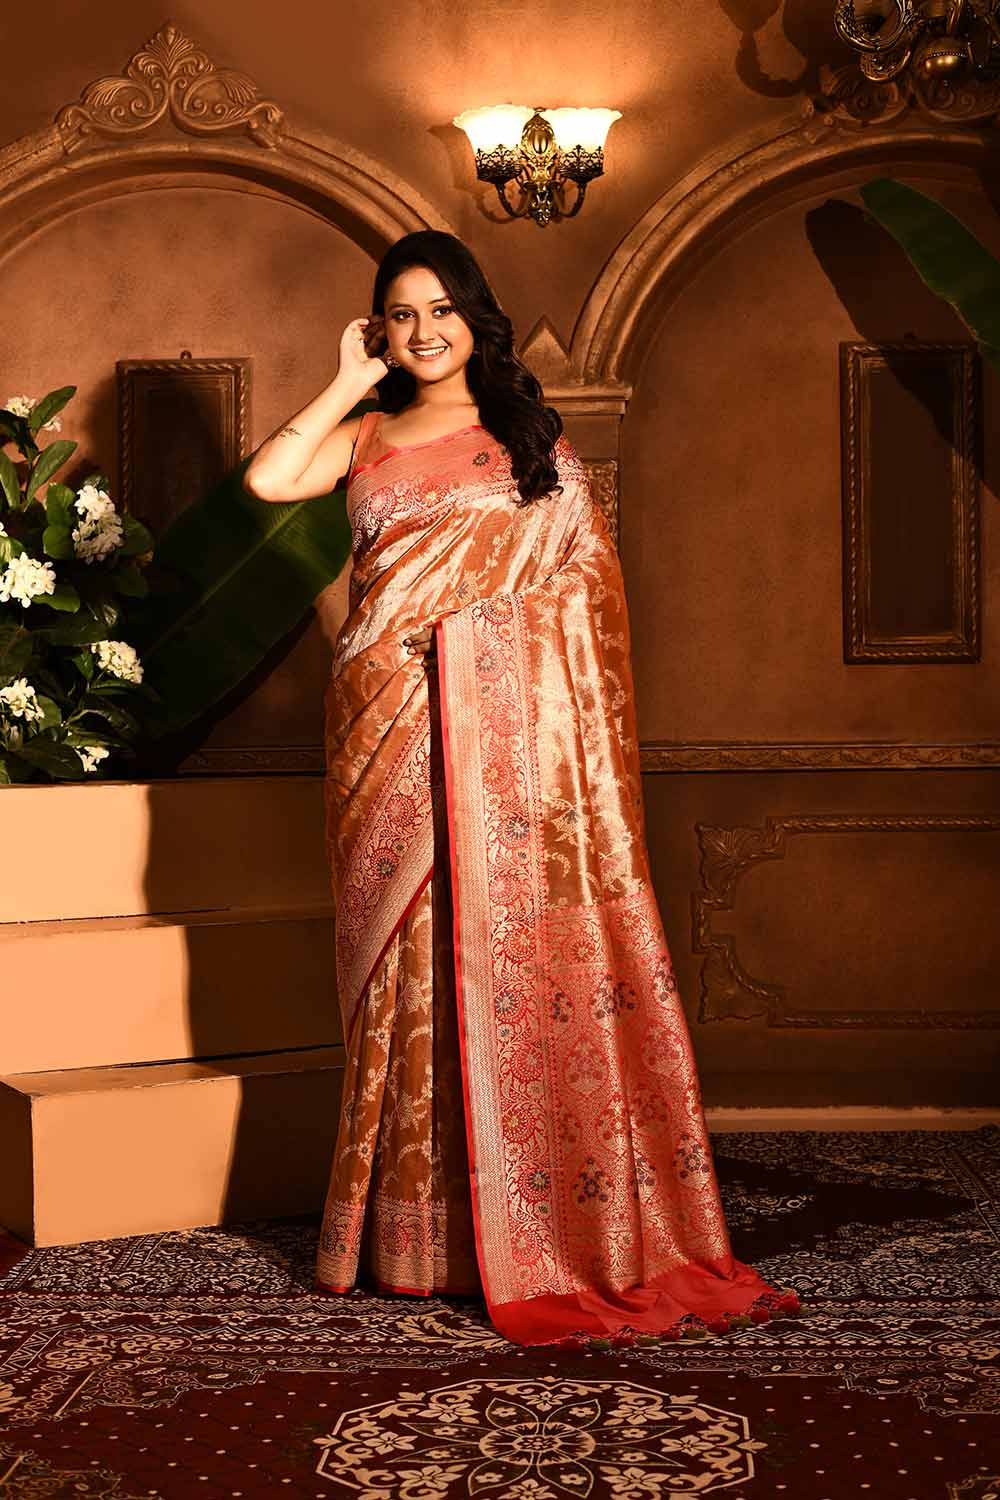 Coral Peach with a Contrast Meenakari Border in Subtle tone Of Red